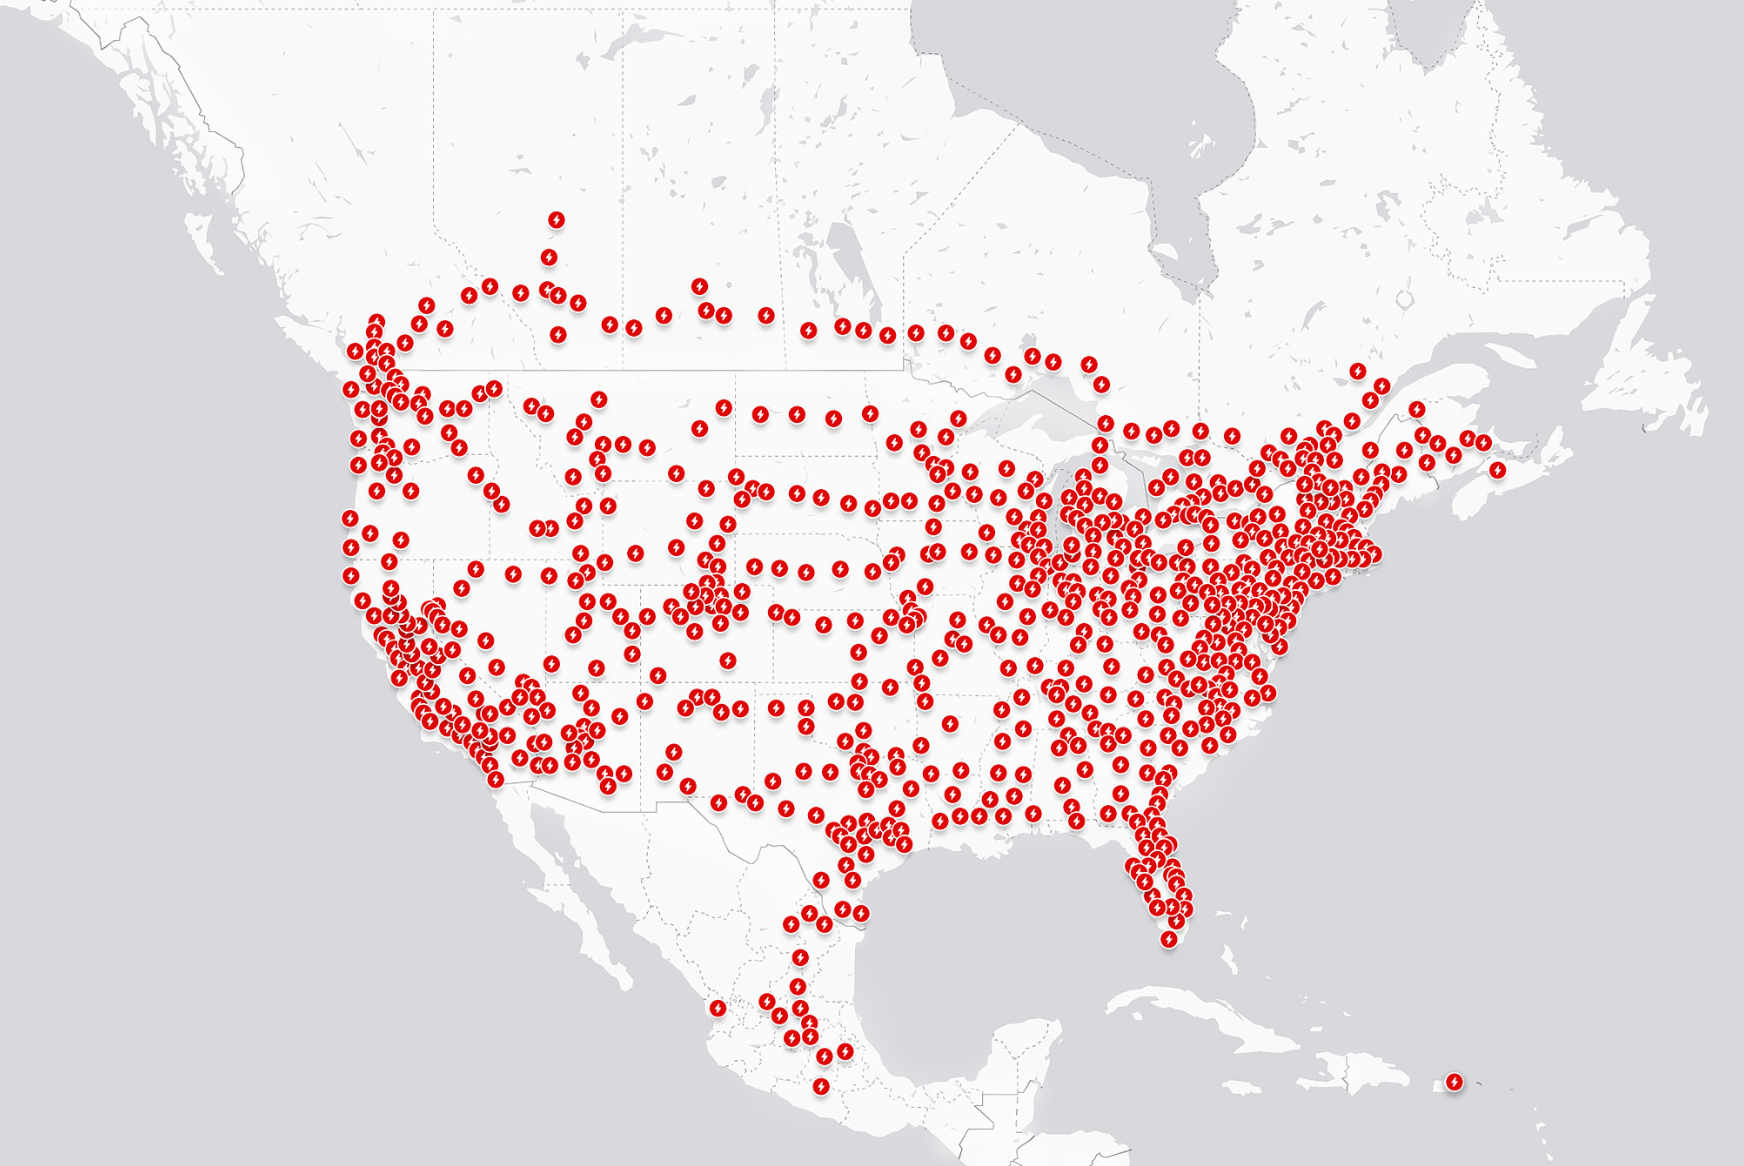 A map of North America with red dots designing Tesla Supercharger locations